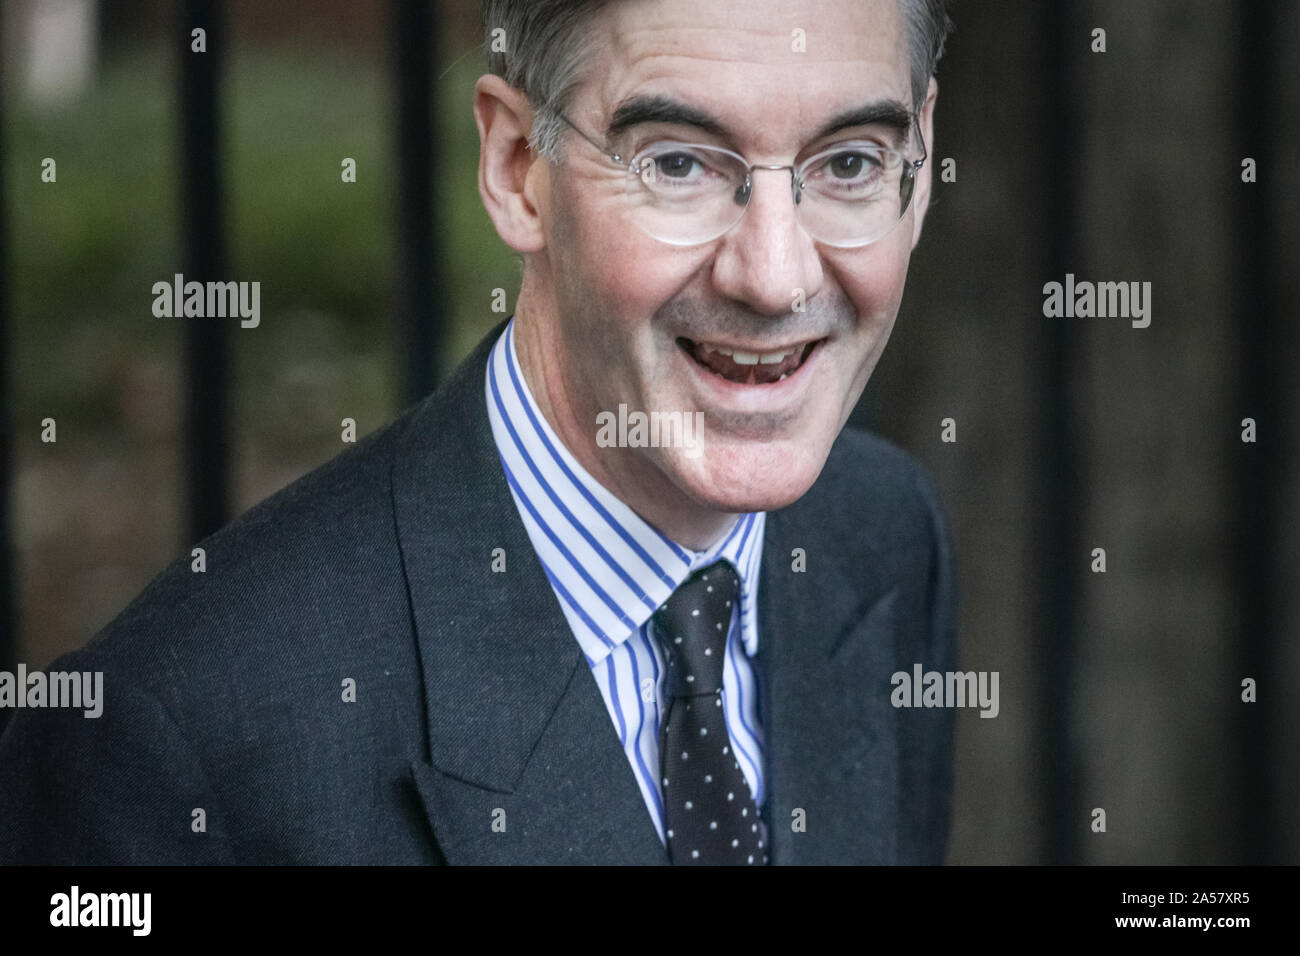 Westminster, London, UK. 18th Oct, 2019. Jacob Rees-Mogg, Leader of the House of Commons. Ministers attend the Cabinet meeting in Downing Street, Westminster, London, UK Credit: Imageplotter/Alamy Live News Stock Photo